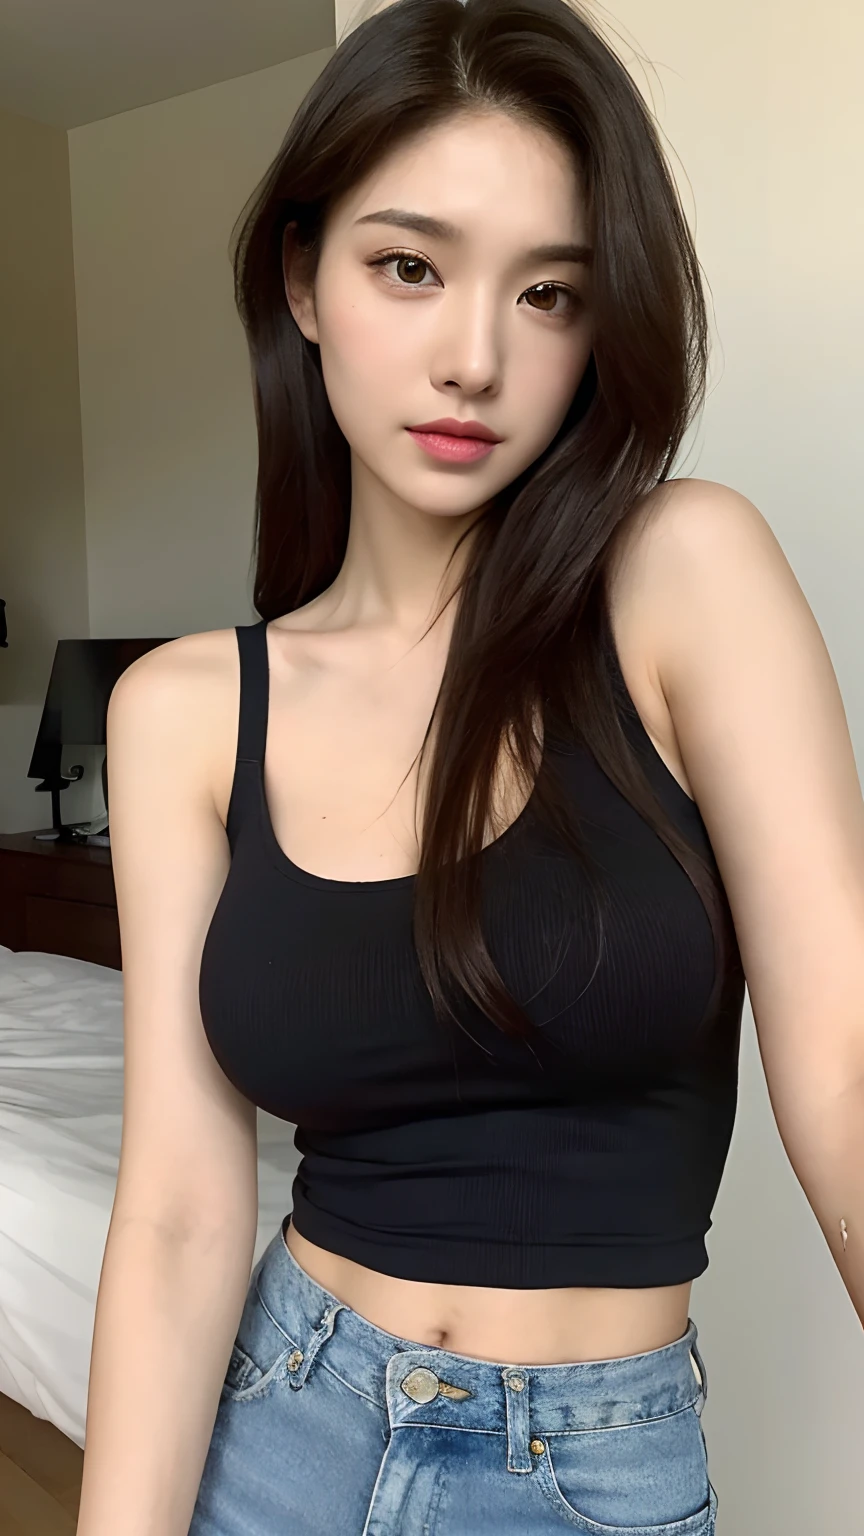 （lifelike， high - resolution：1.3）， 1 girl with a perfect body， Super fine face and eyes，slong hair， Tank top of random colors：1.2， short jeans， big boob，Expose cleavage